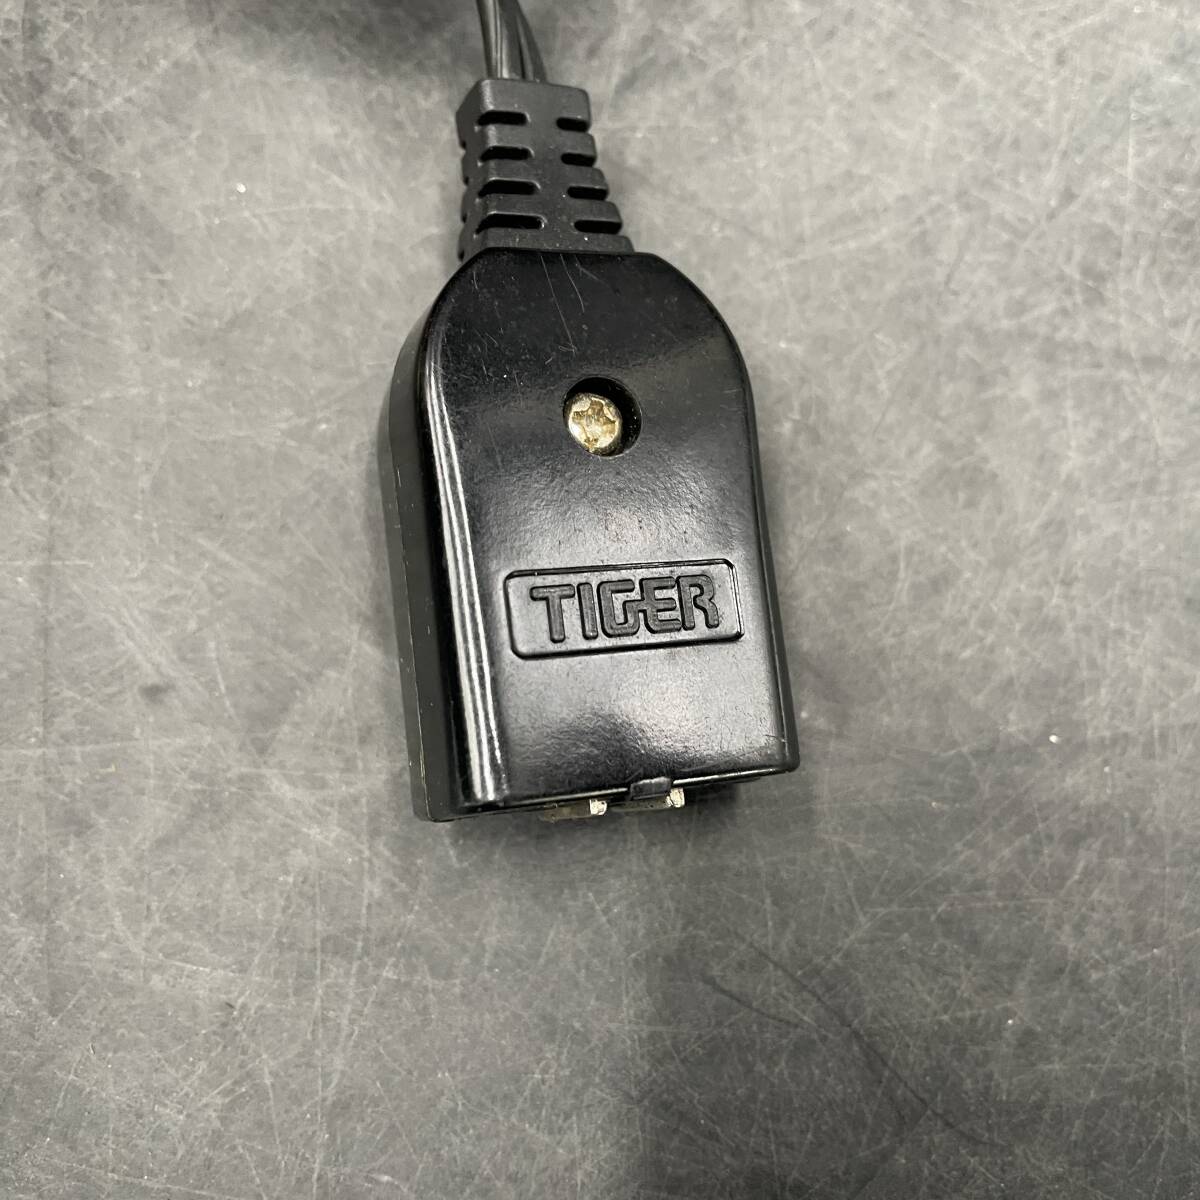 TIGER/ Tiger power supply cable code thermos bottle 